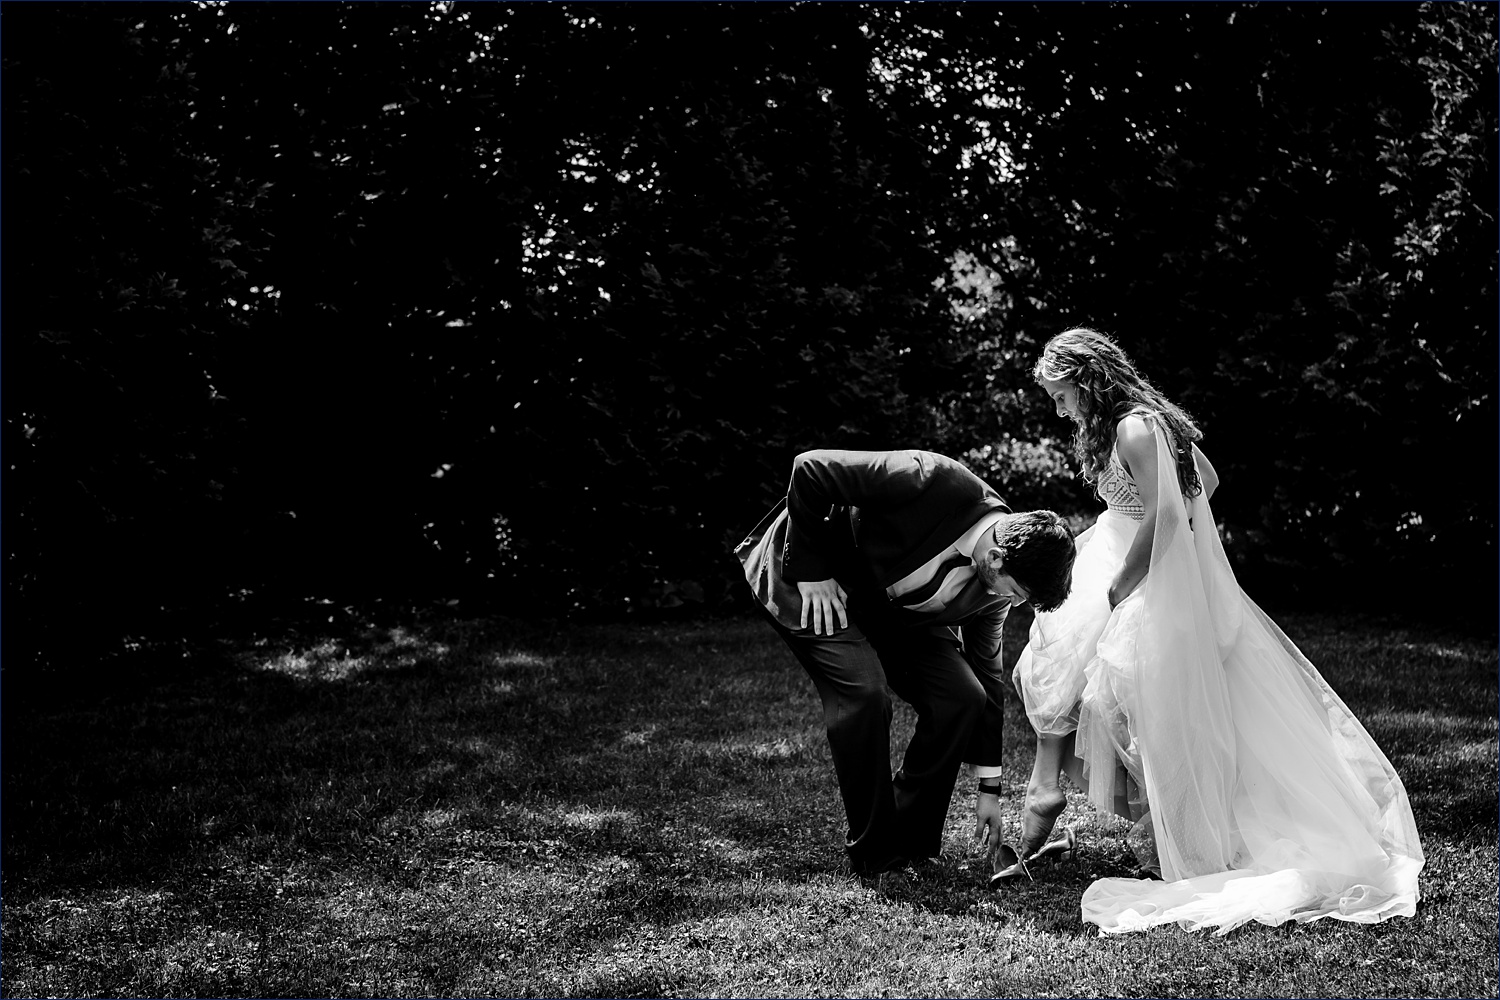 The groom helps the bride into her wedding day shoes out in the grass